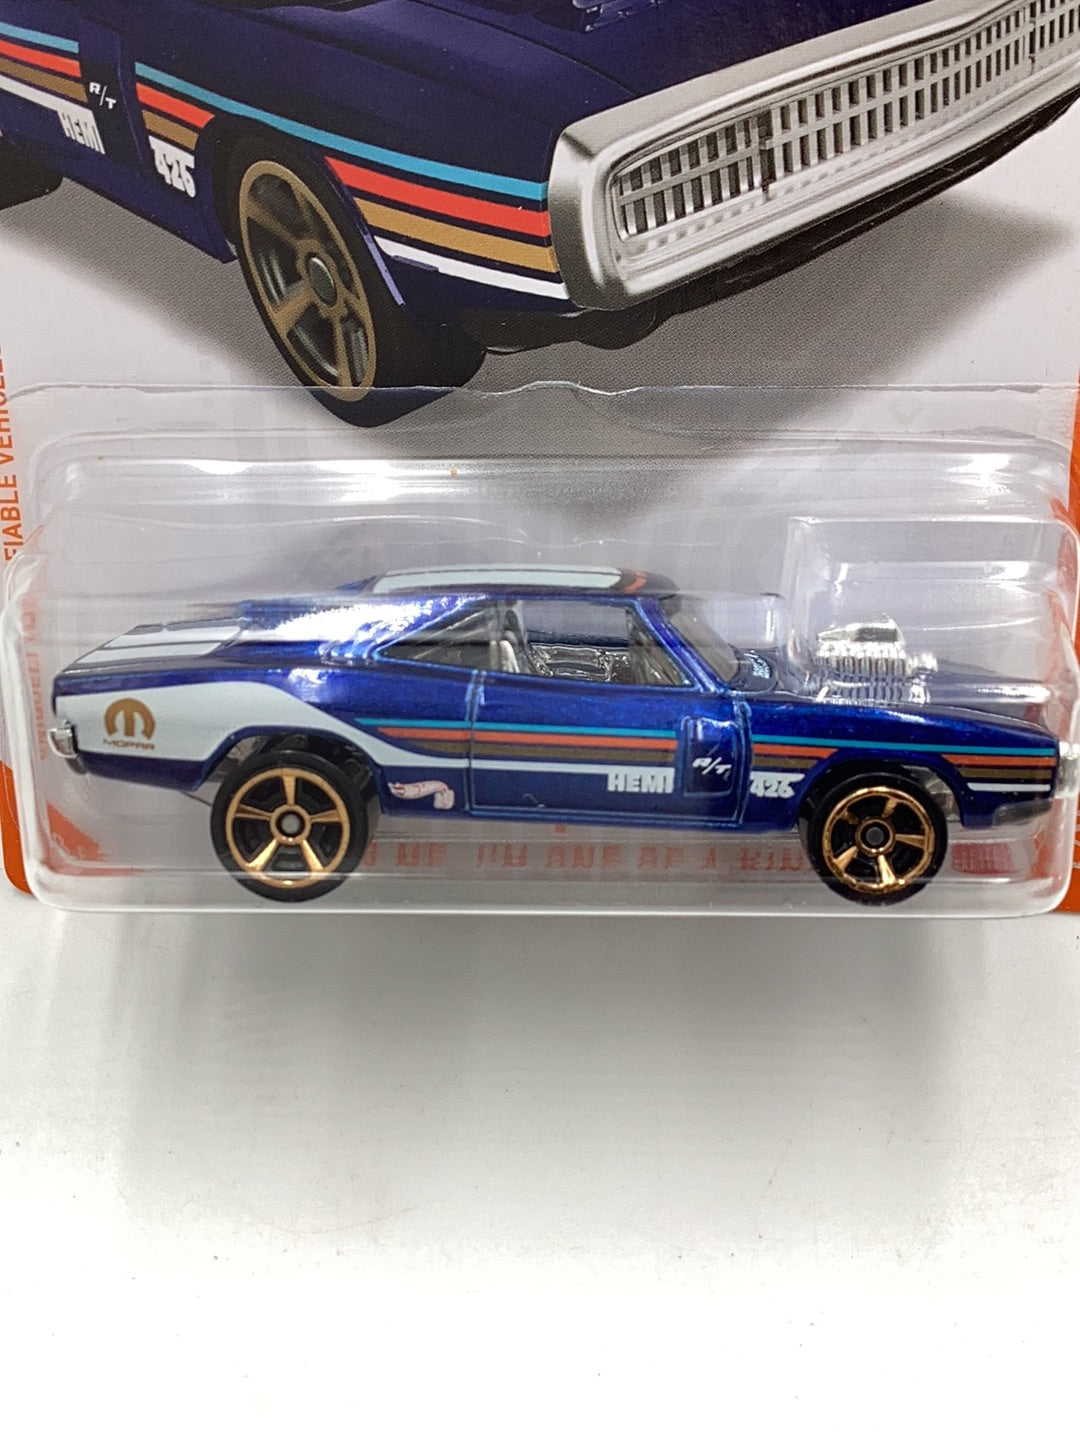 Hot Wheels ID #8 70 Dodge Charger R/T chase  8/8 160B